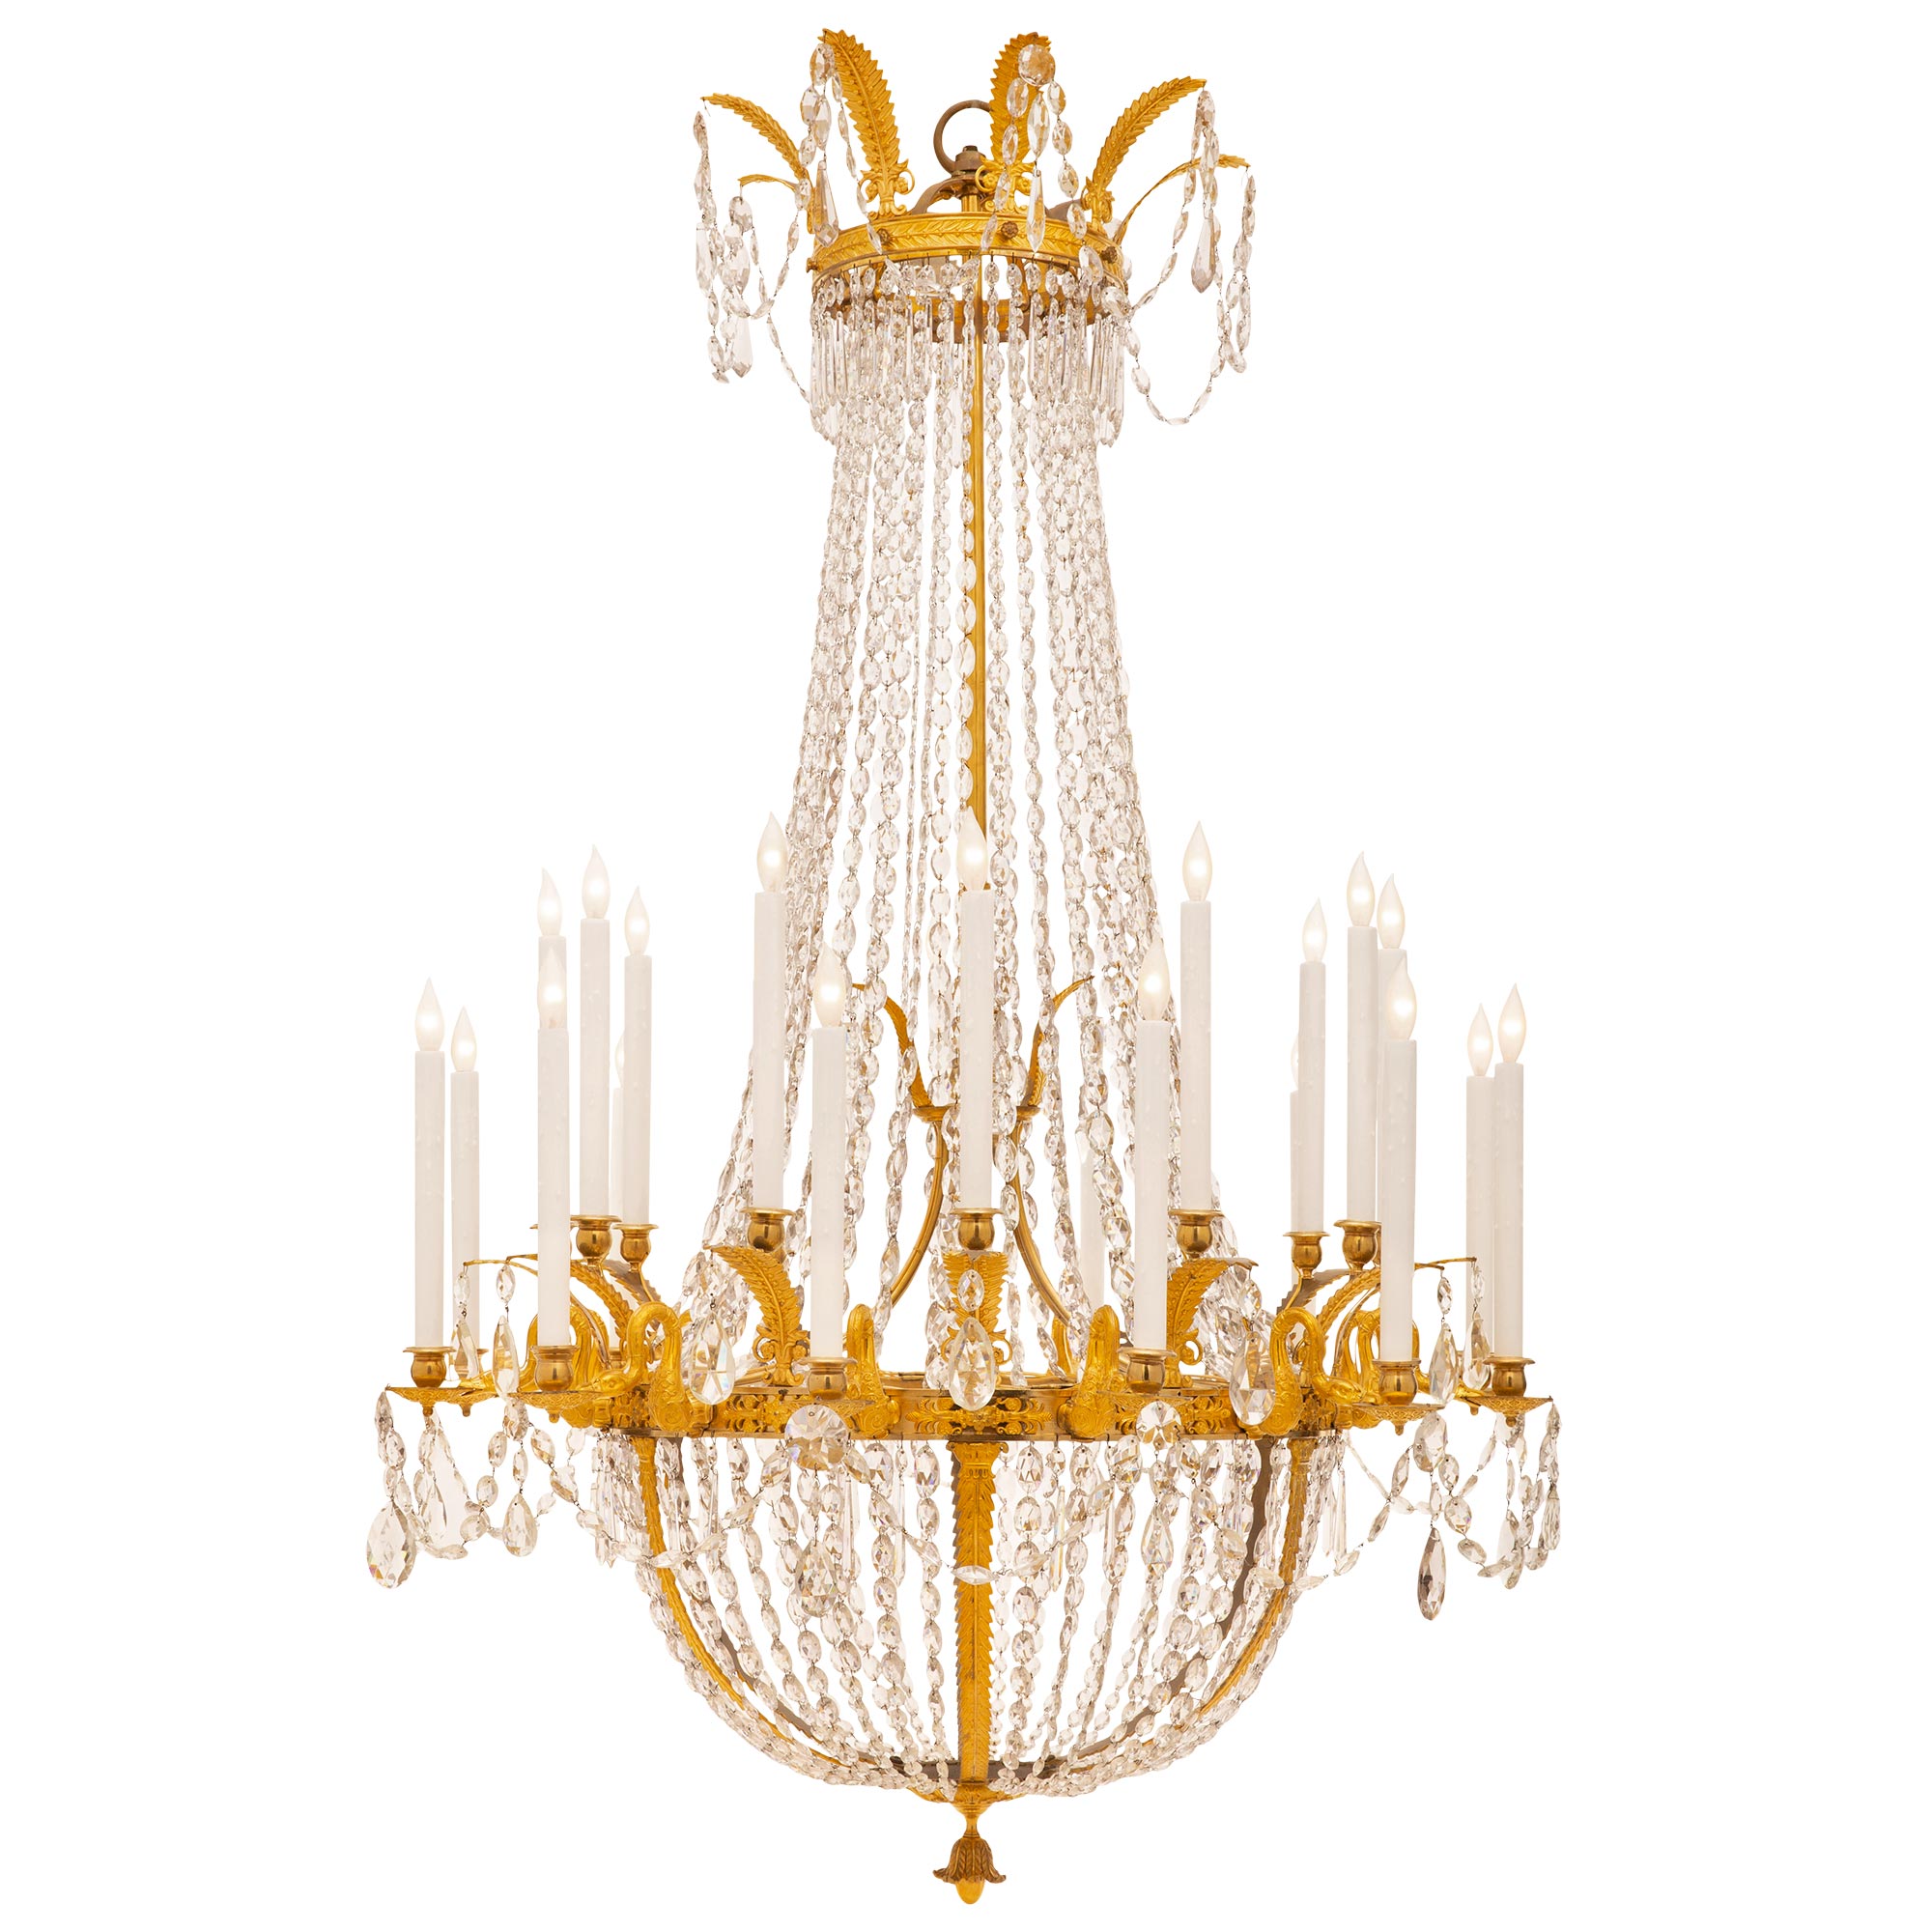 French 19th Century First Empire Period Ormolu and Crystal Chandelier For Sale